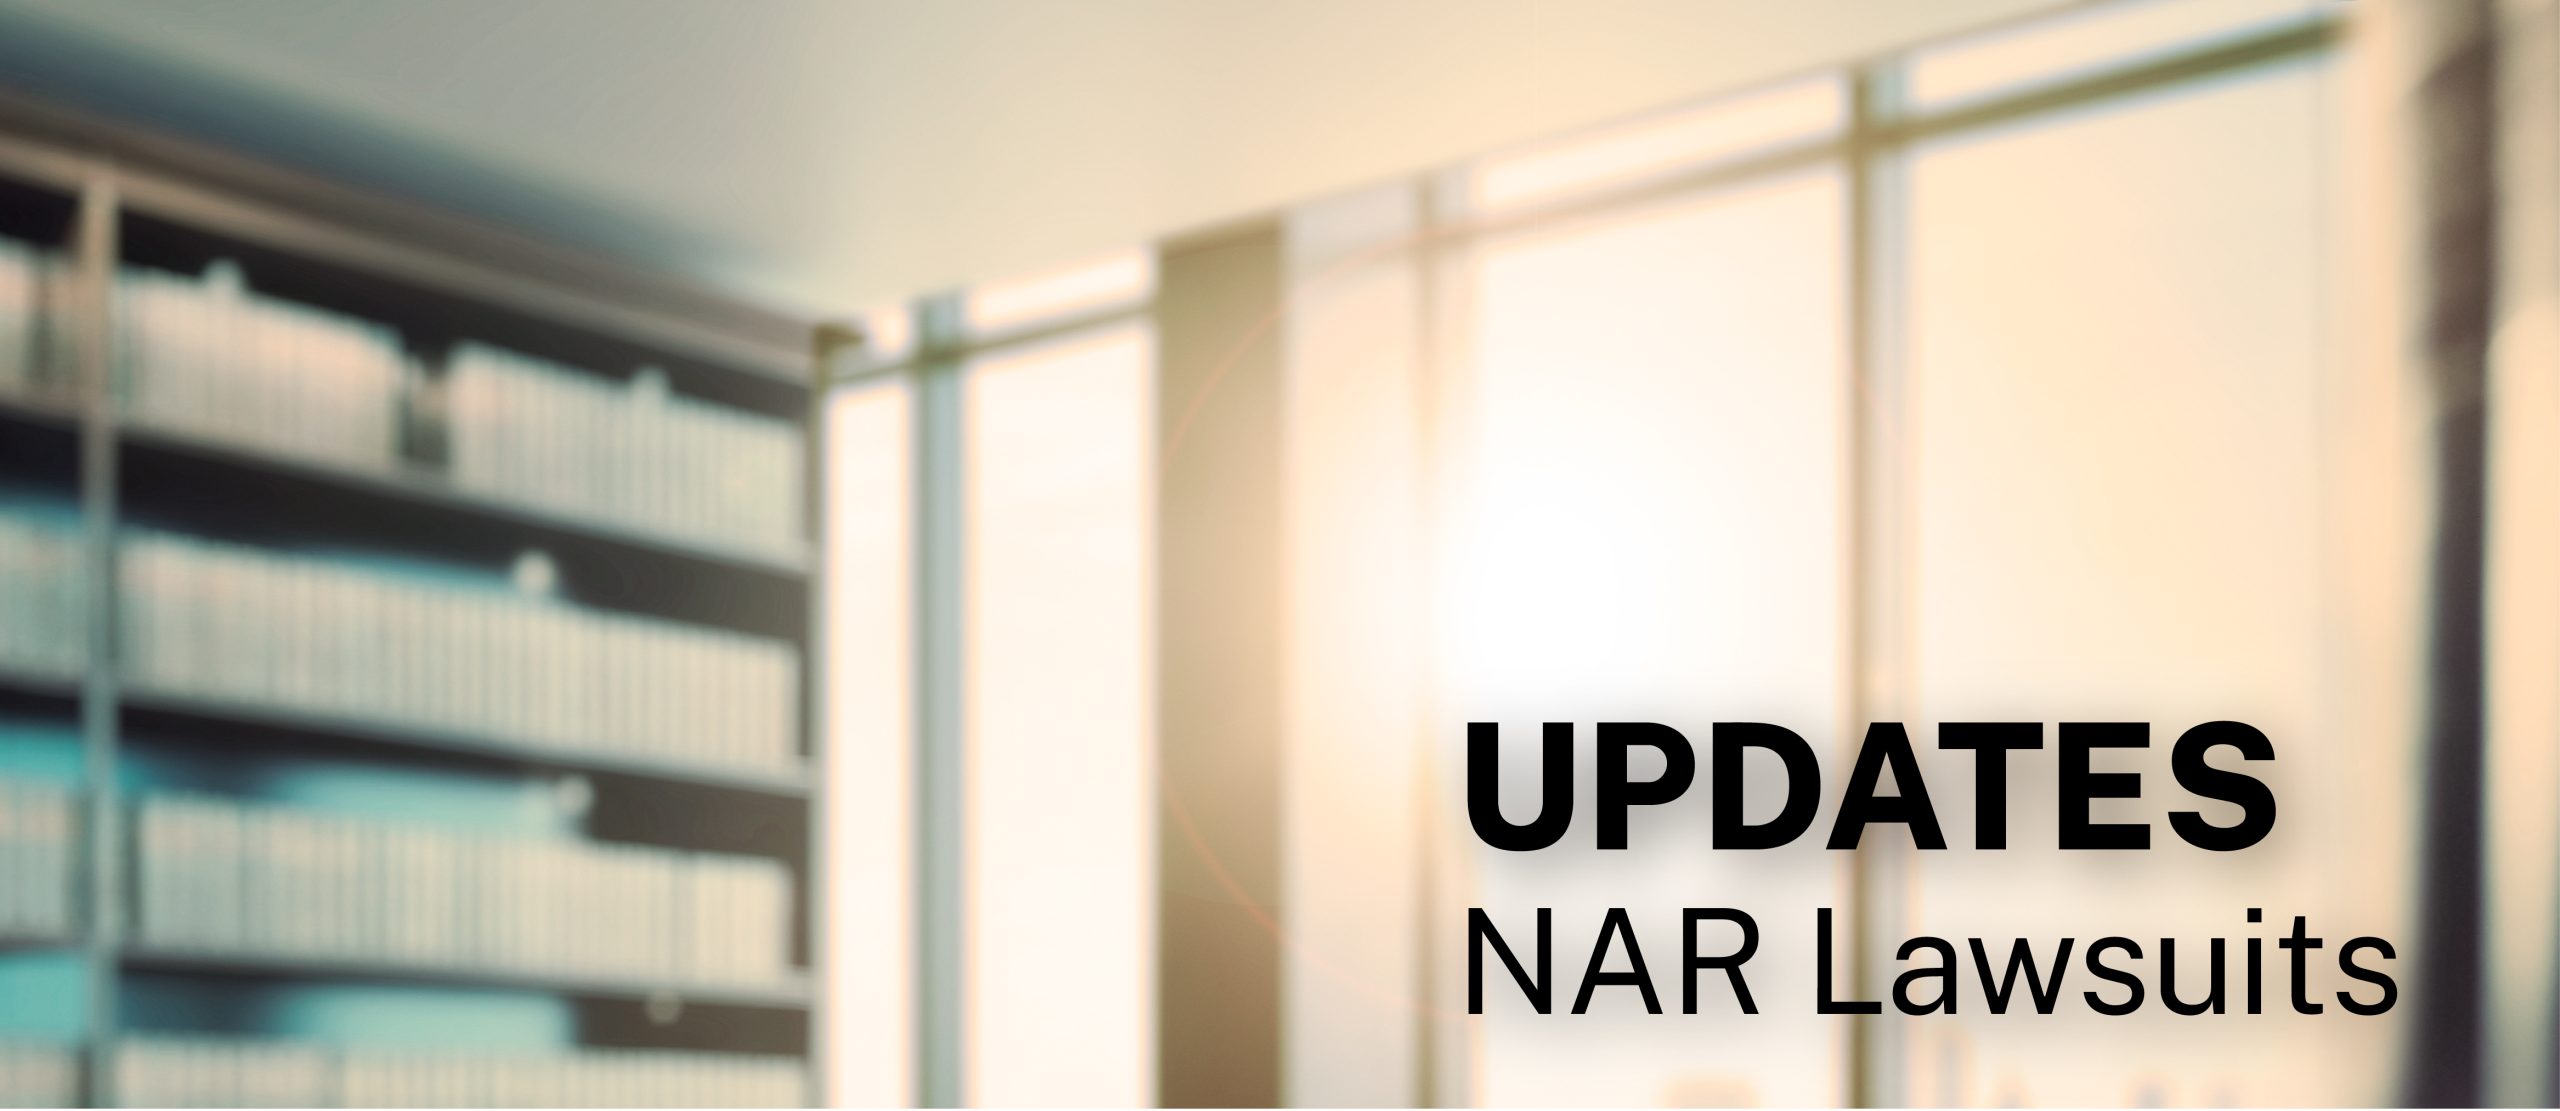 NAR Lawsuits Updates